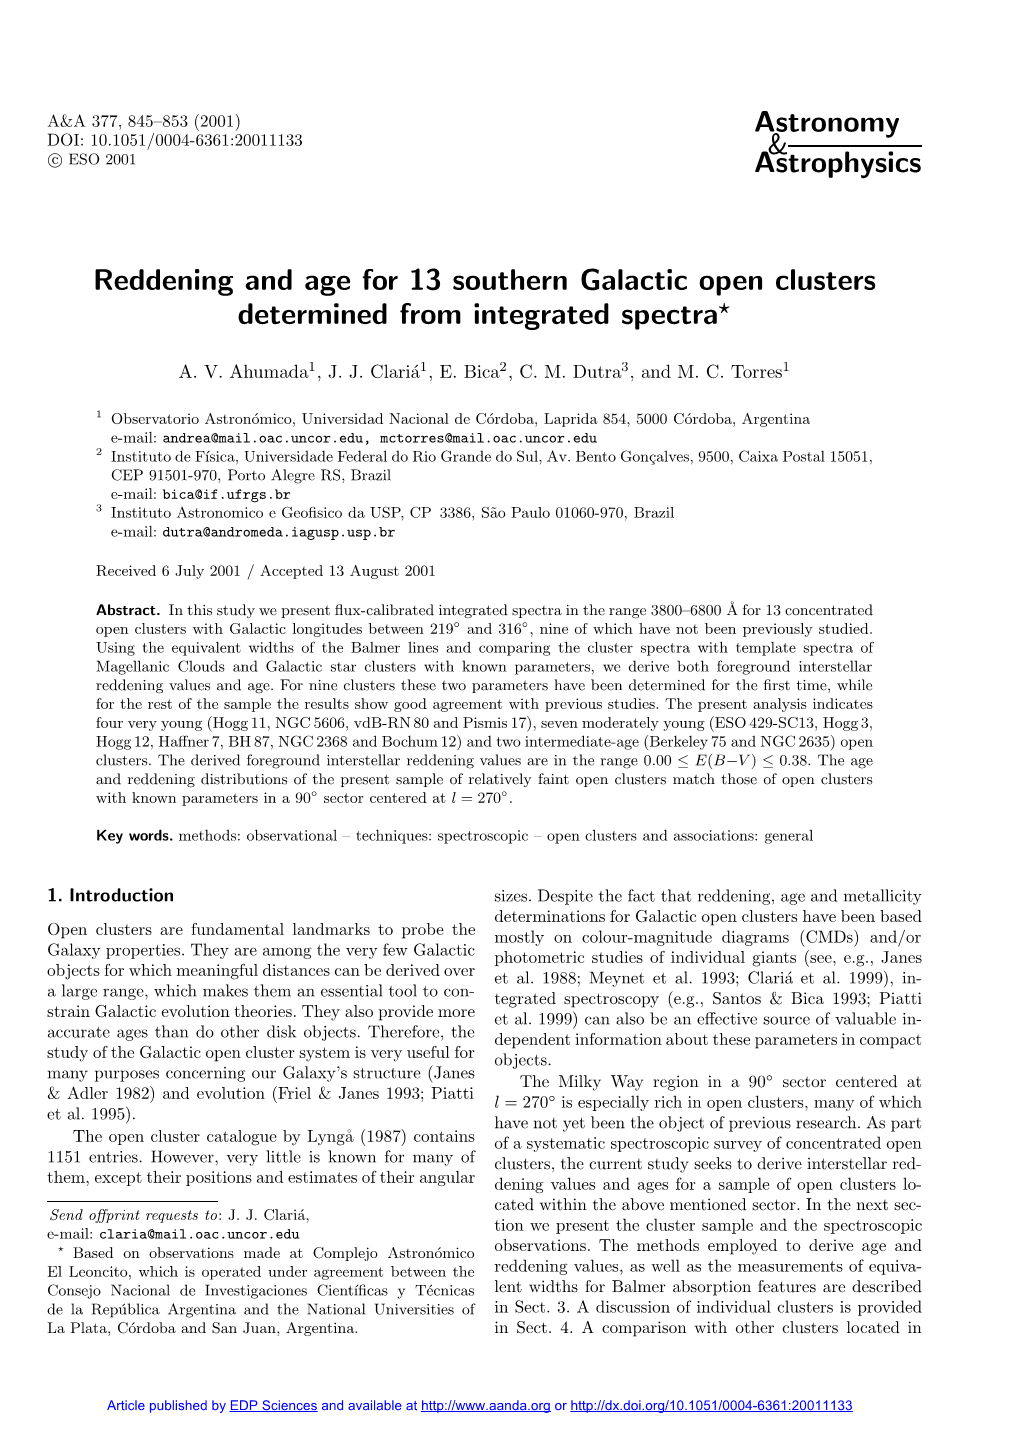 Reddening and Age for 13 Southern Galactic Open Clusters Determined from Integrated Spectra?